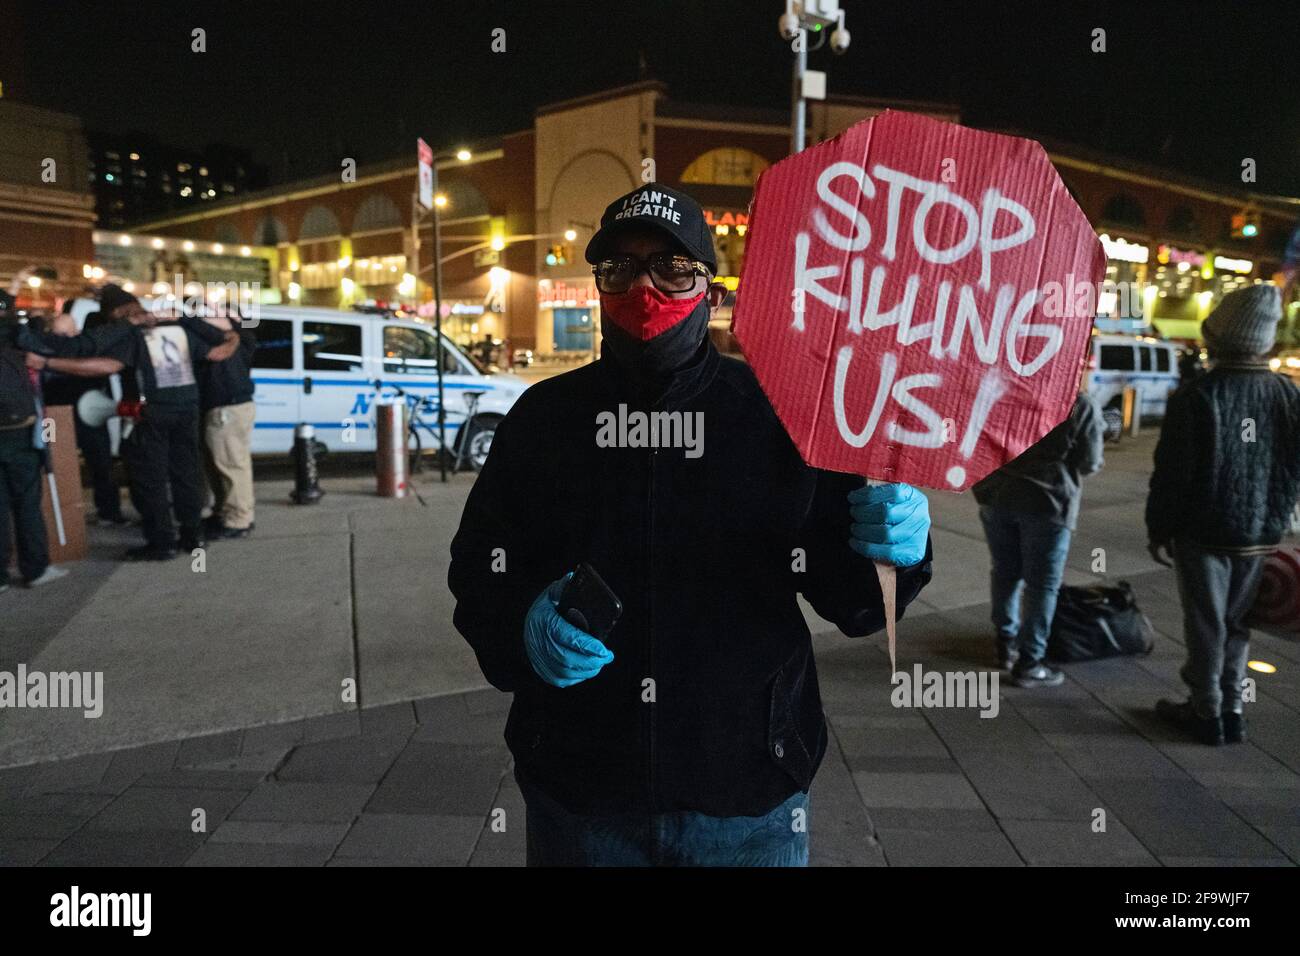 Brooklyn, New York, USA 20 Apr 2021. Man holds 'Stop Killing Us' sign as protesters gather at Barclays Center hours after a jury found former Minneapolis police officer Derek Chauvin guilty of murdering George Floyd in 2020. Stock Photo